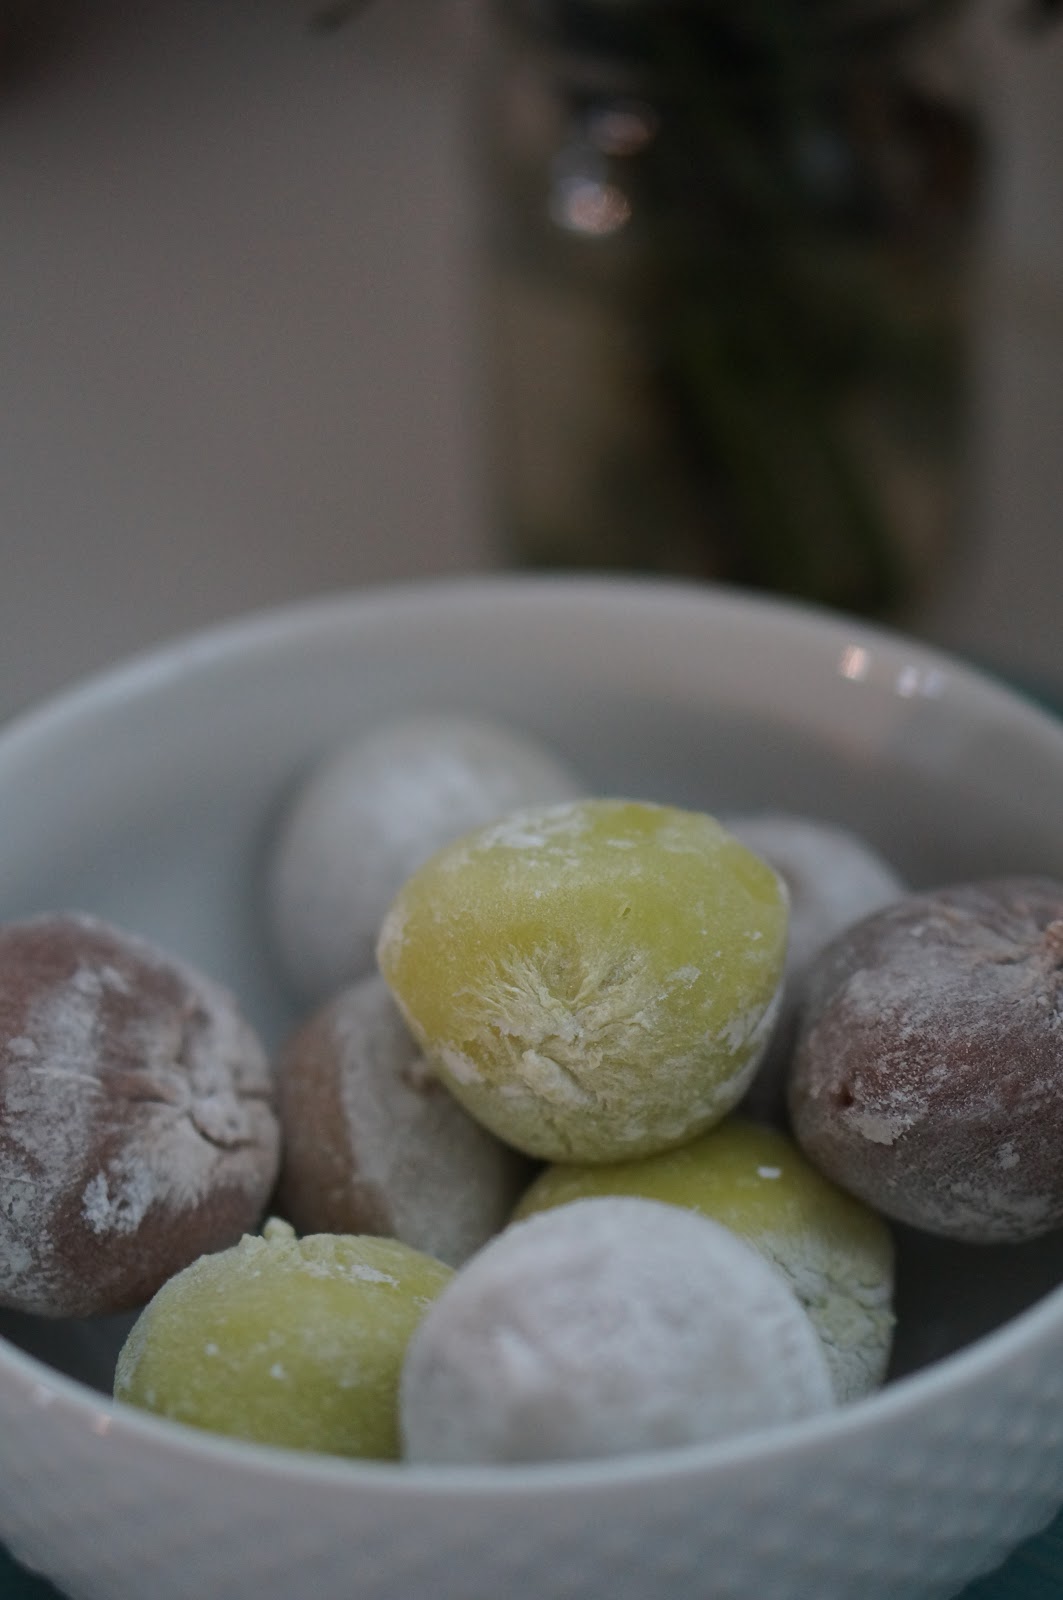 Popular North Carolina style blogger shares how she is snacking this summer with My/Mo Mochi Ice Cream. Click here to read about this delicious snack!